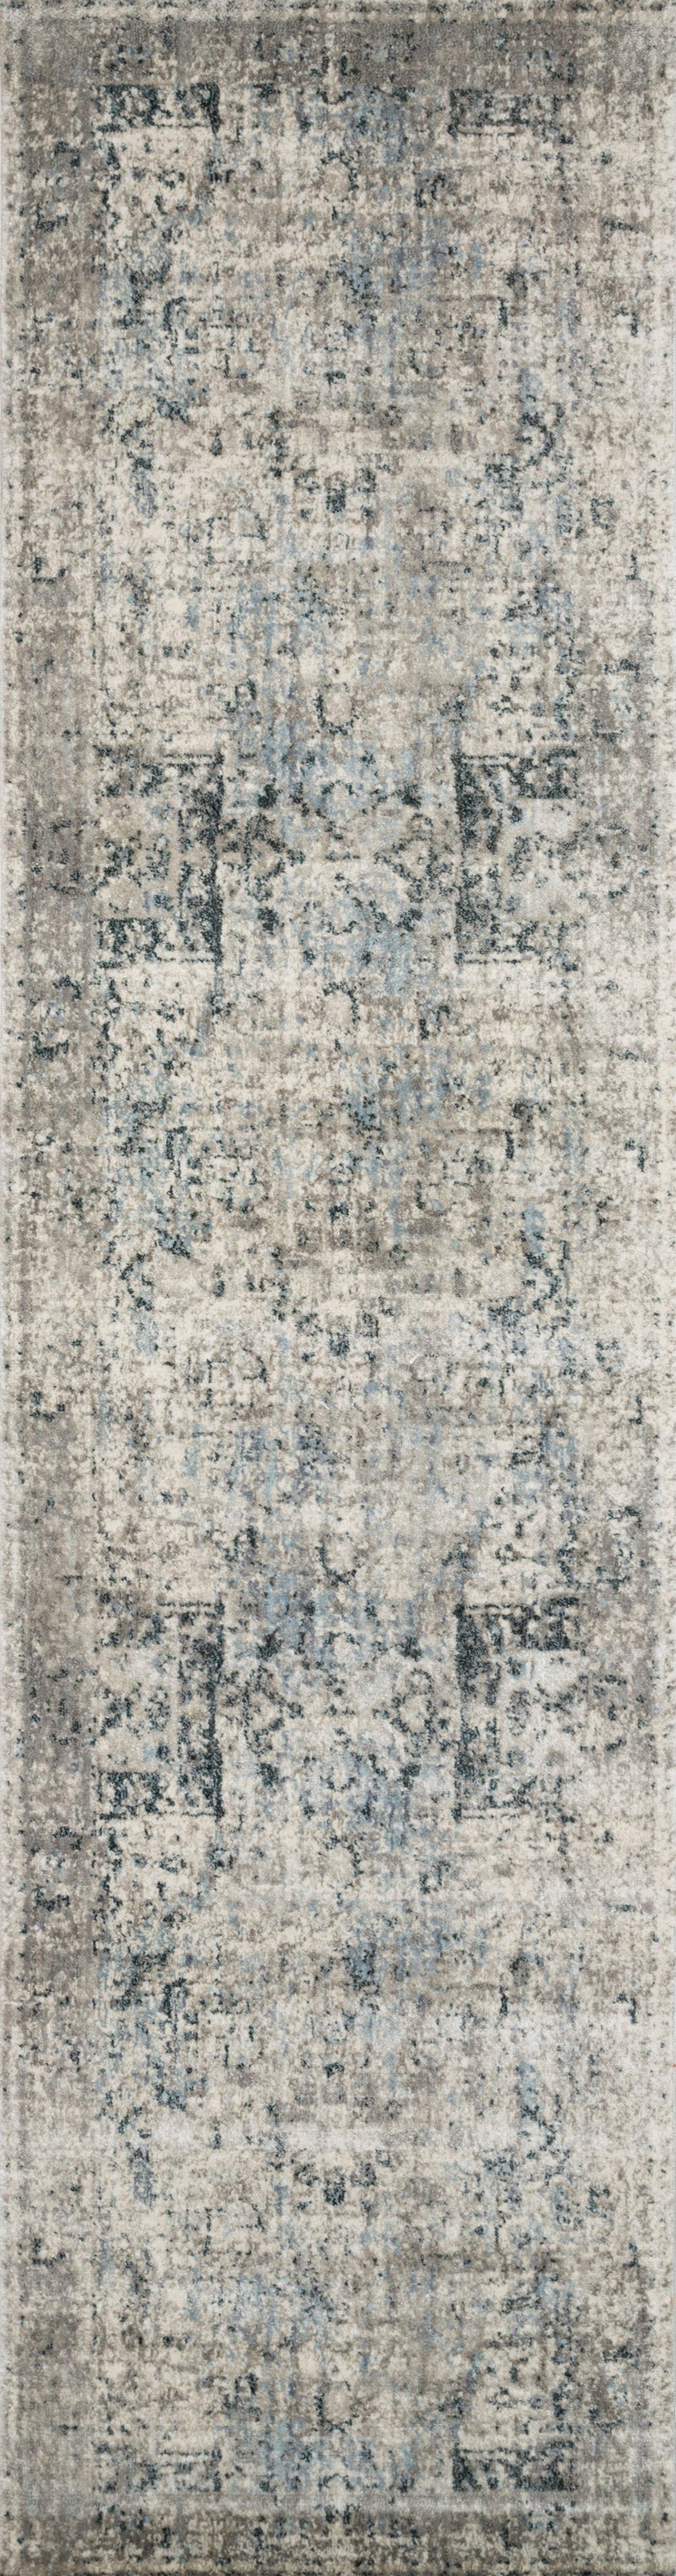 Loloi Transitional Clara Polypropylene & Polyester Power Loomed Rug in Blue, Gray (AF-20) Rugs Loloi Rugs 